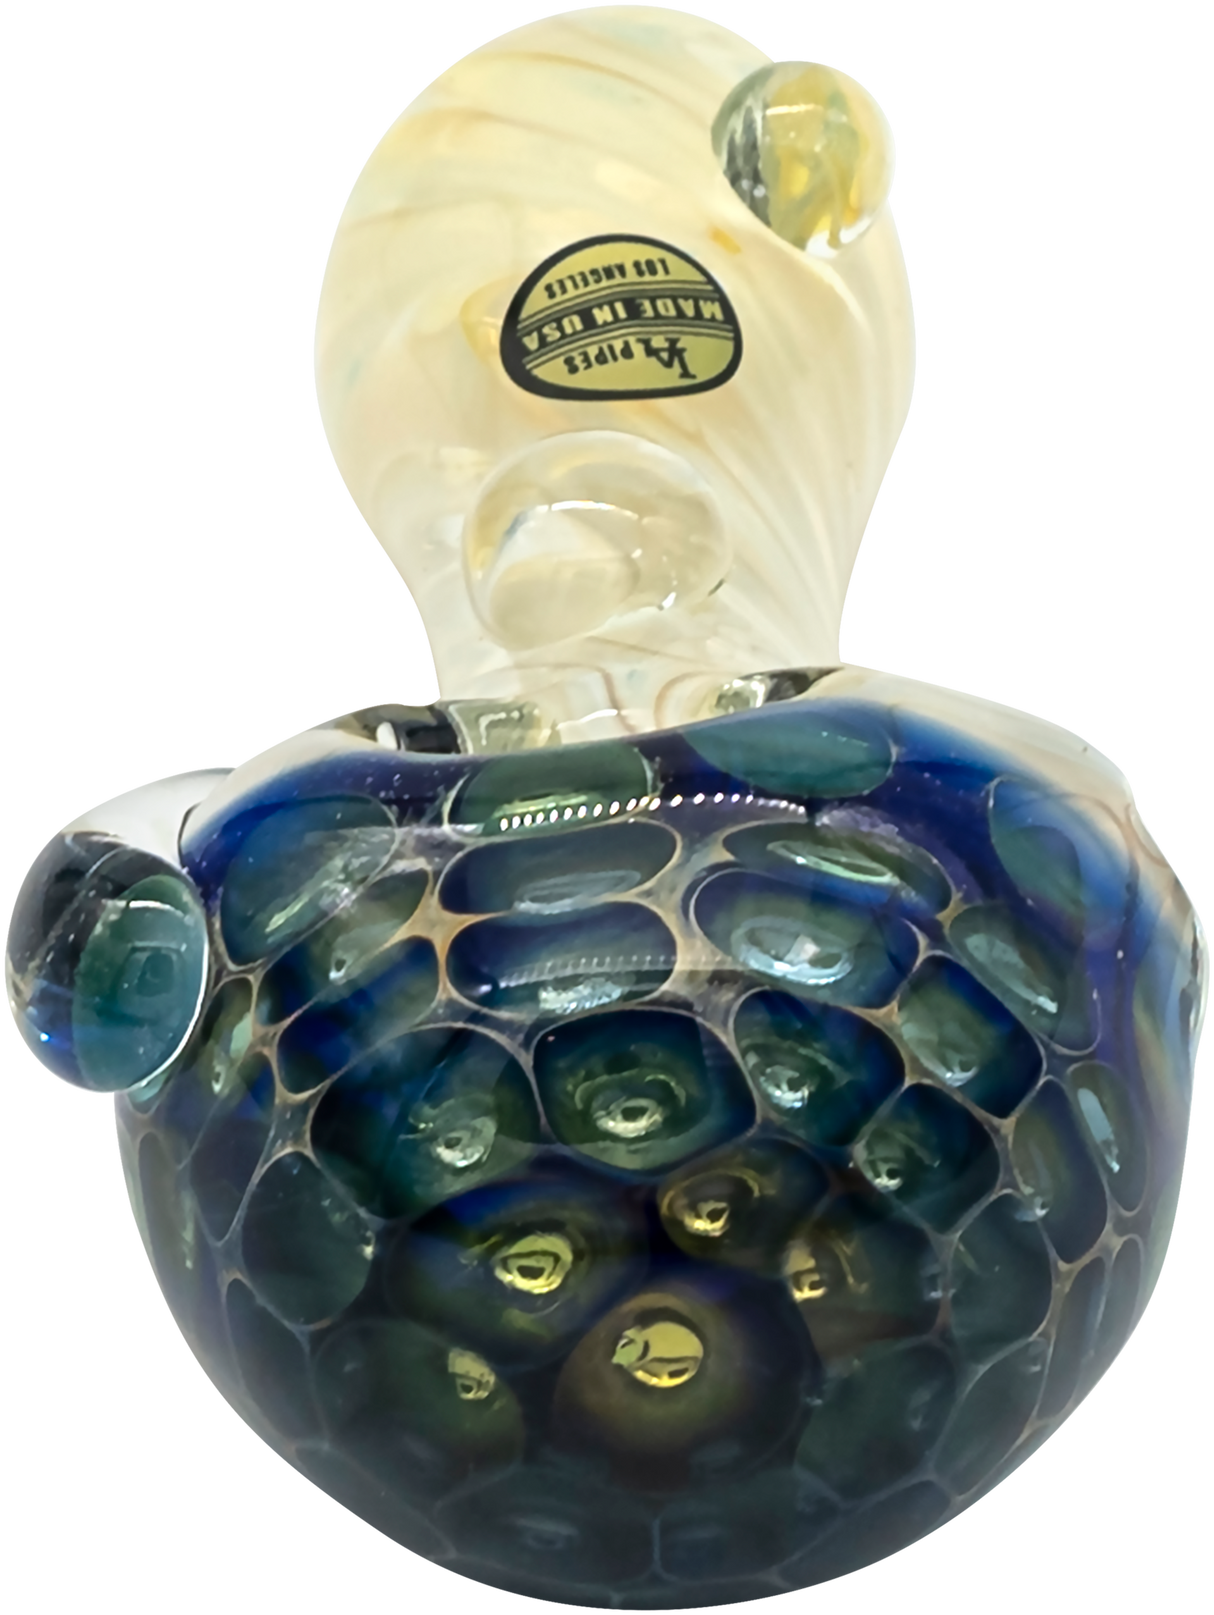 LA Pipes "The Hive" Honeycomb Spoon Pipe, Color Changing Borosilicate Glass, 4" Side View